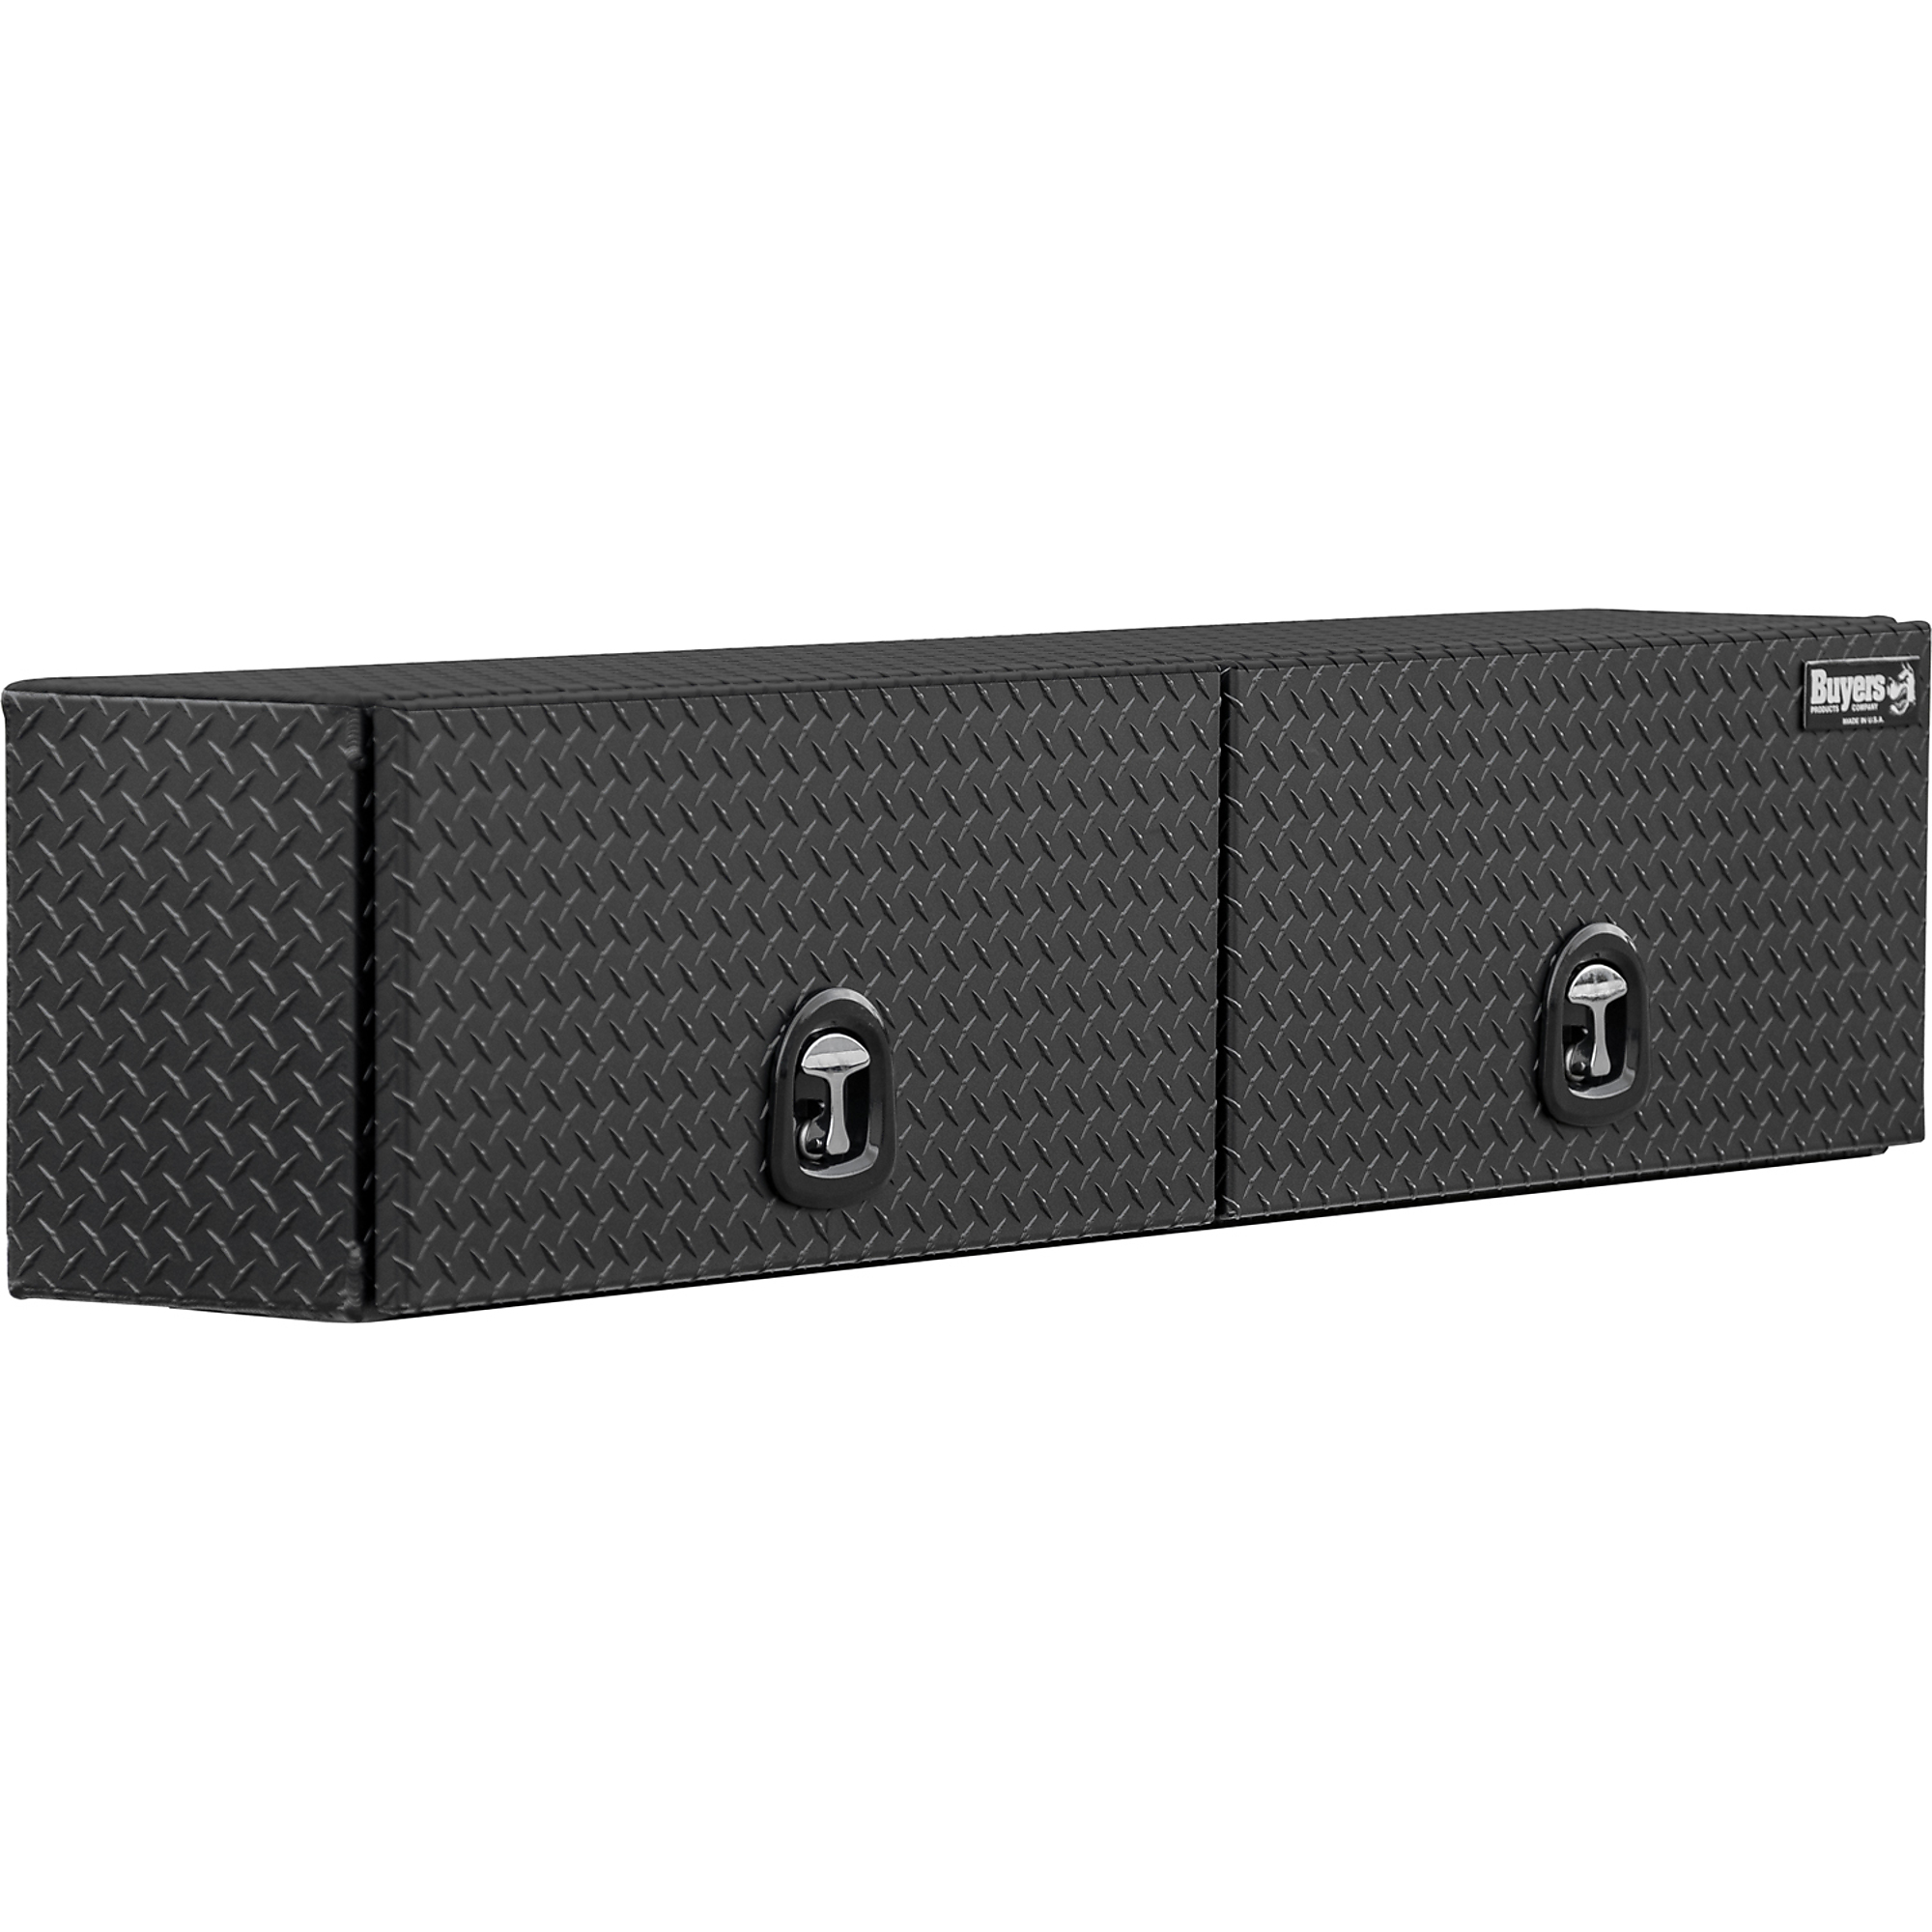 Buyers Products, 16x13x72 Matte Black Aluminum Topsider, Width 16 in, Material Aluminum, Color Finish Diamond Plate Matte Black, Model 1722351